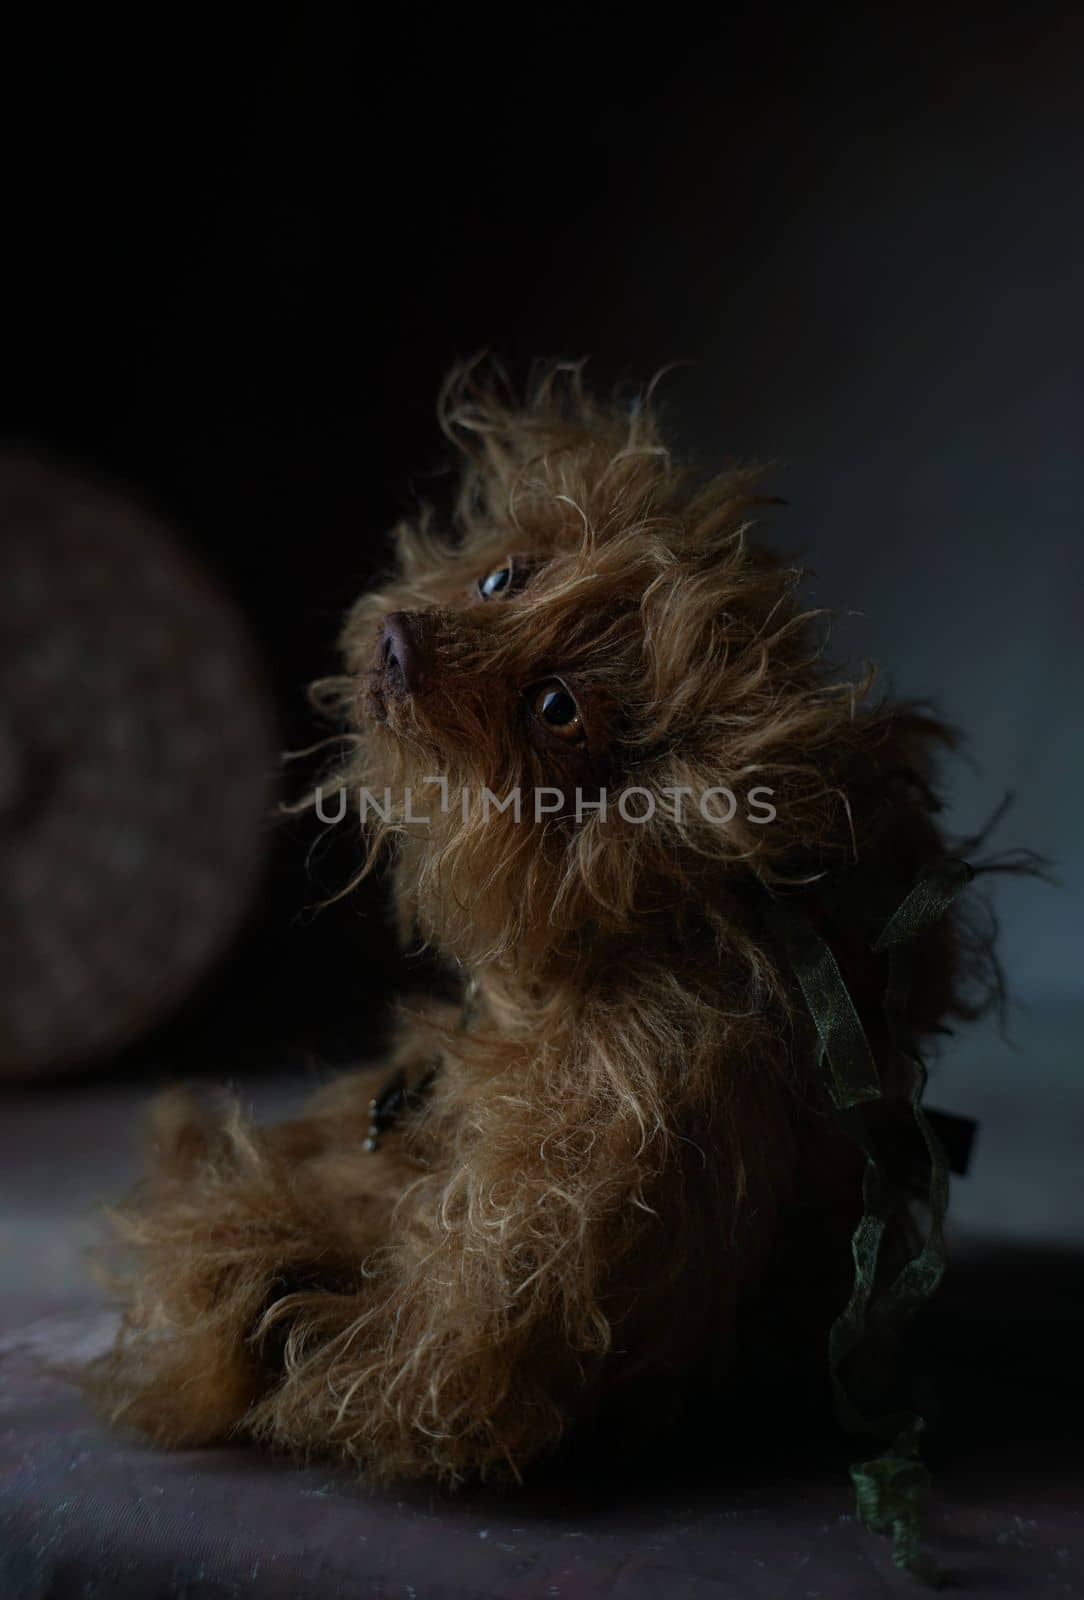 a photo of a handmade collectible teddy bear, suitable for printing in a calendar card or for inserting into a frame for delivering aesthetic pleasure in your free time. High quality photo